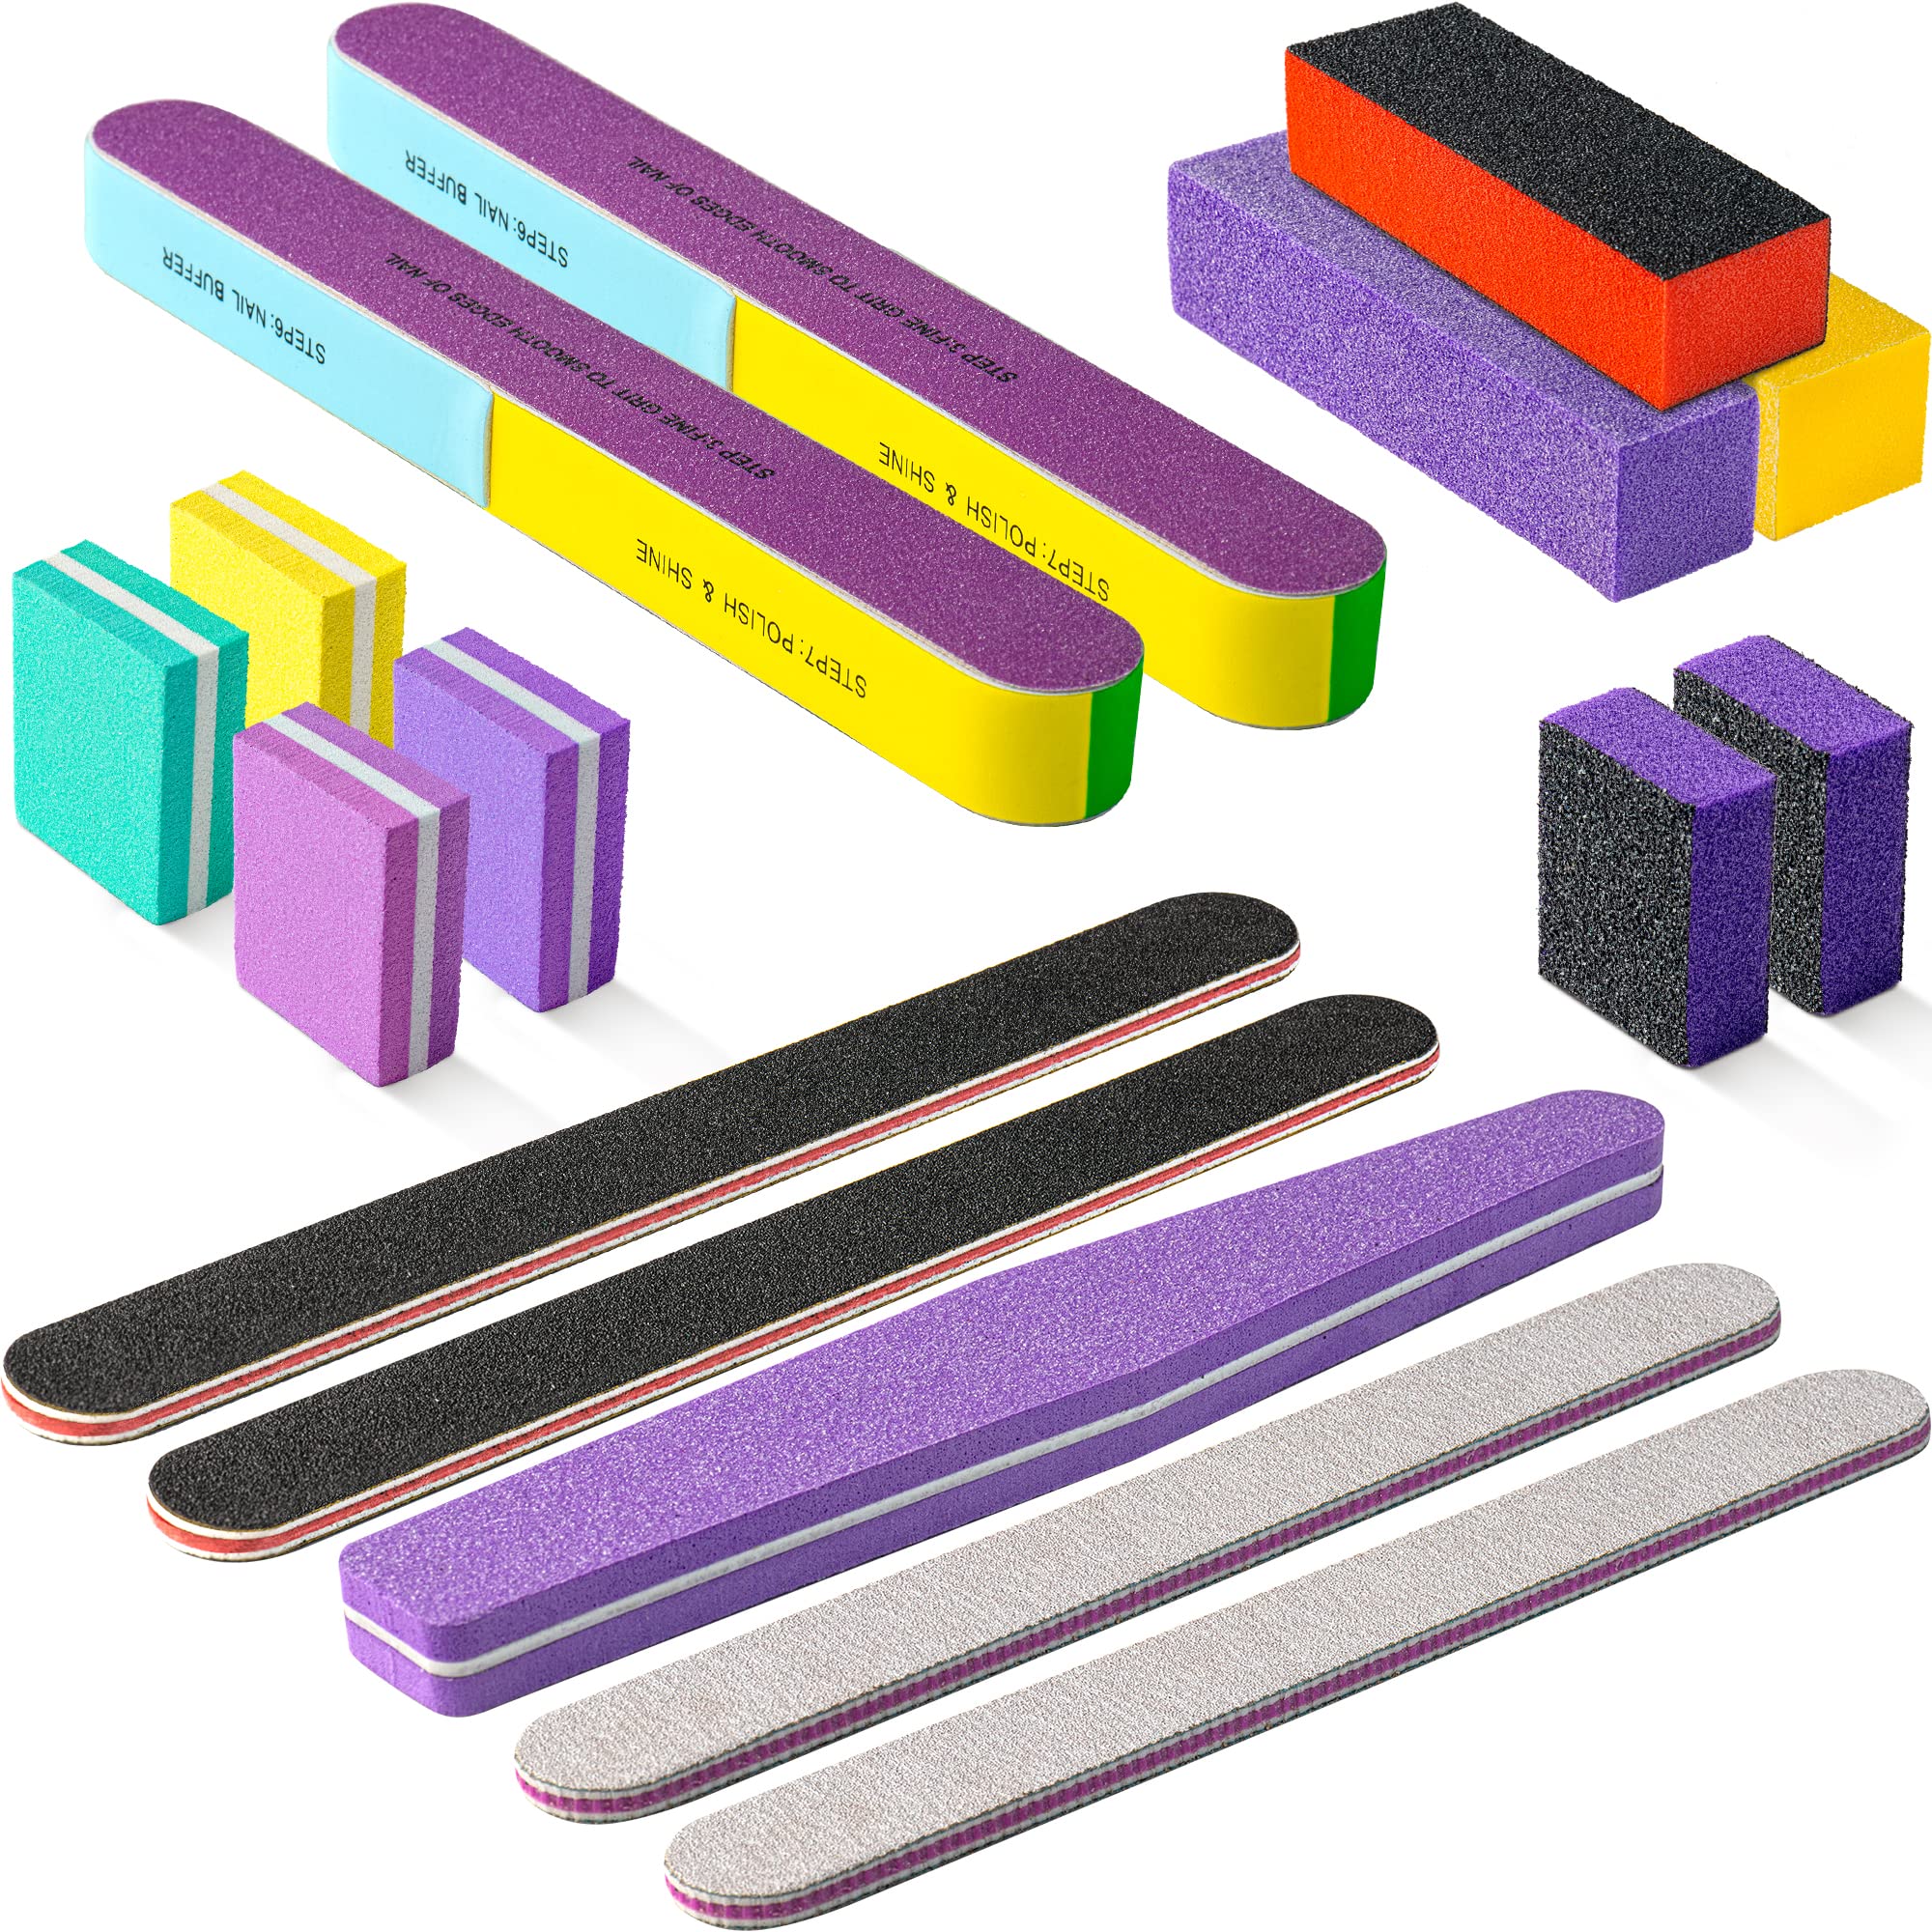 Best Nail Files And Buffers with 12 pcs per sets, 10.99 USD